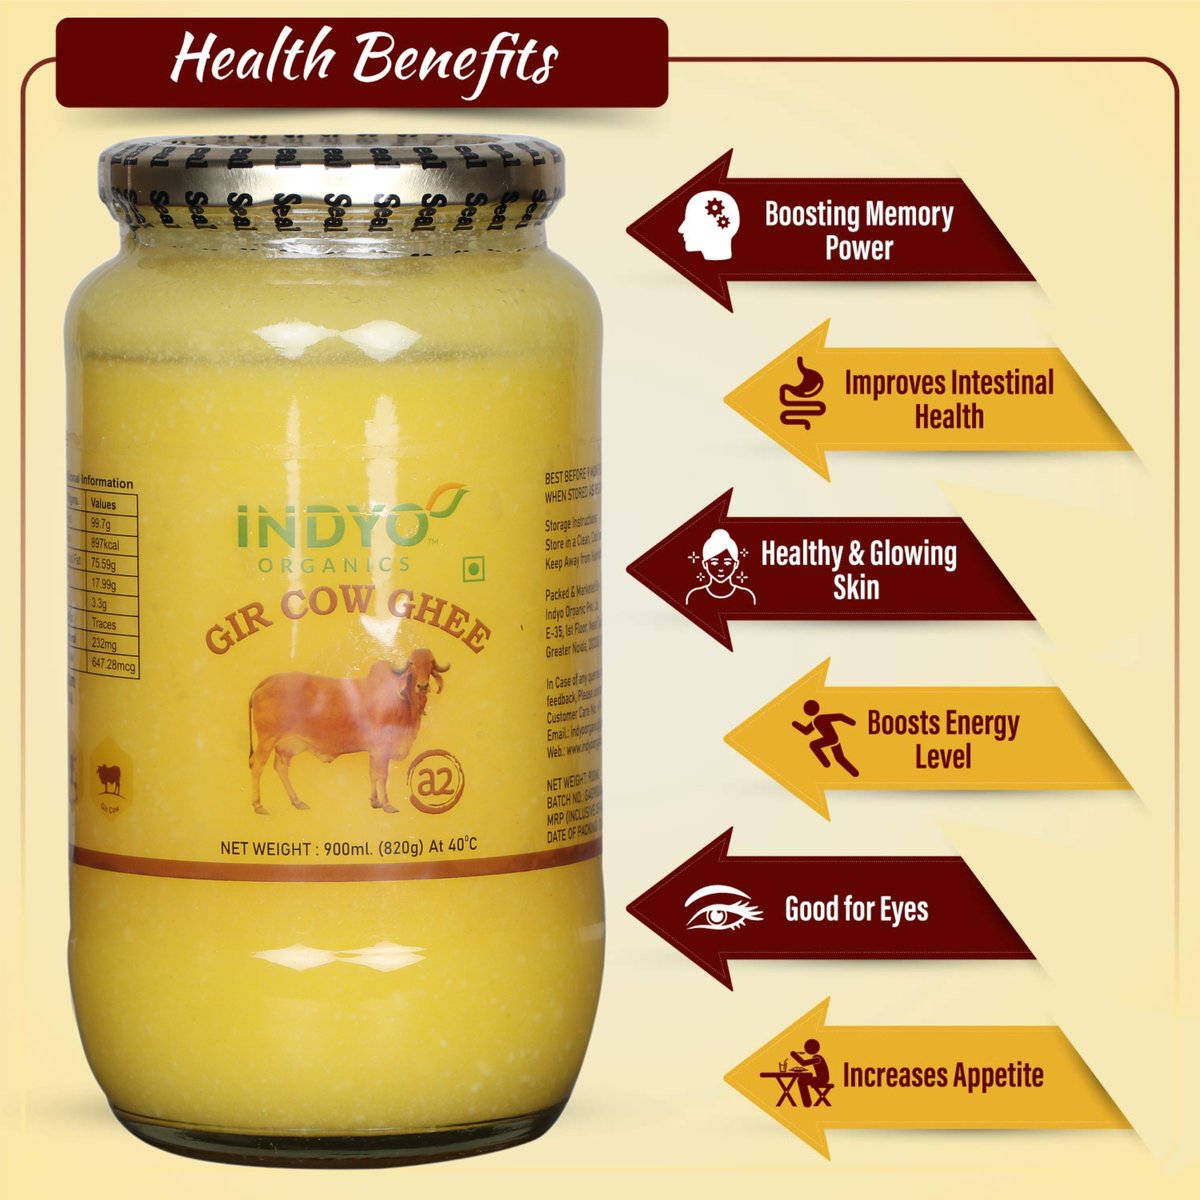 Available in 900Ml, & 450Ml Glass Jar Branded & Private Label Packing
15ltr HDPE jar packs for Bulk Supply
For Trade Inquiry Please Call/Whatsup @ +91-9643767575

#Gircow #ghee #bilona #traditional #farm2fork #indyoorganics #msme #dpiit #startsinup #msdfoundation